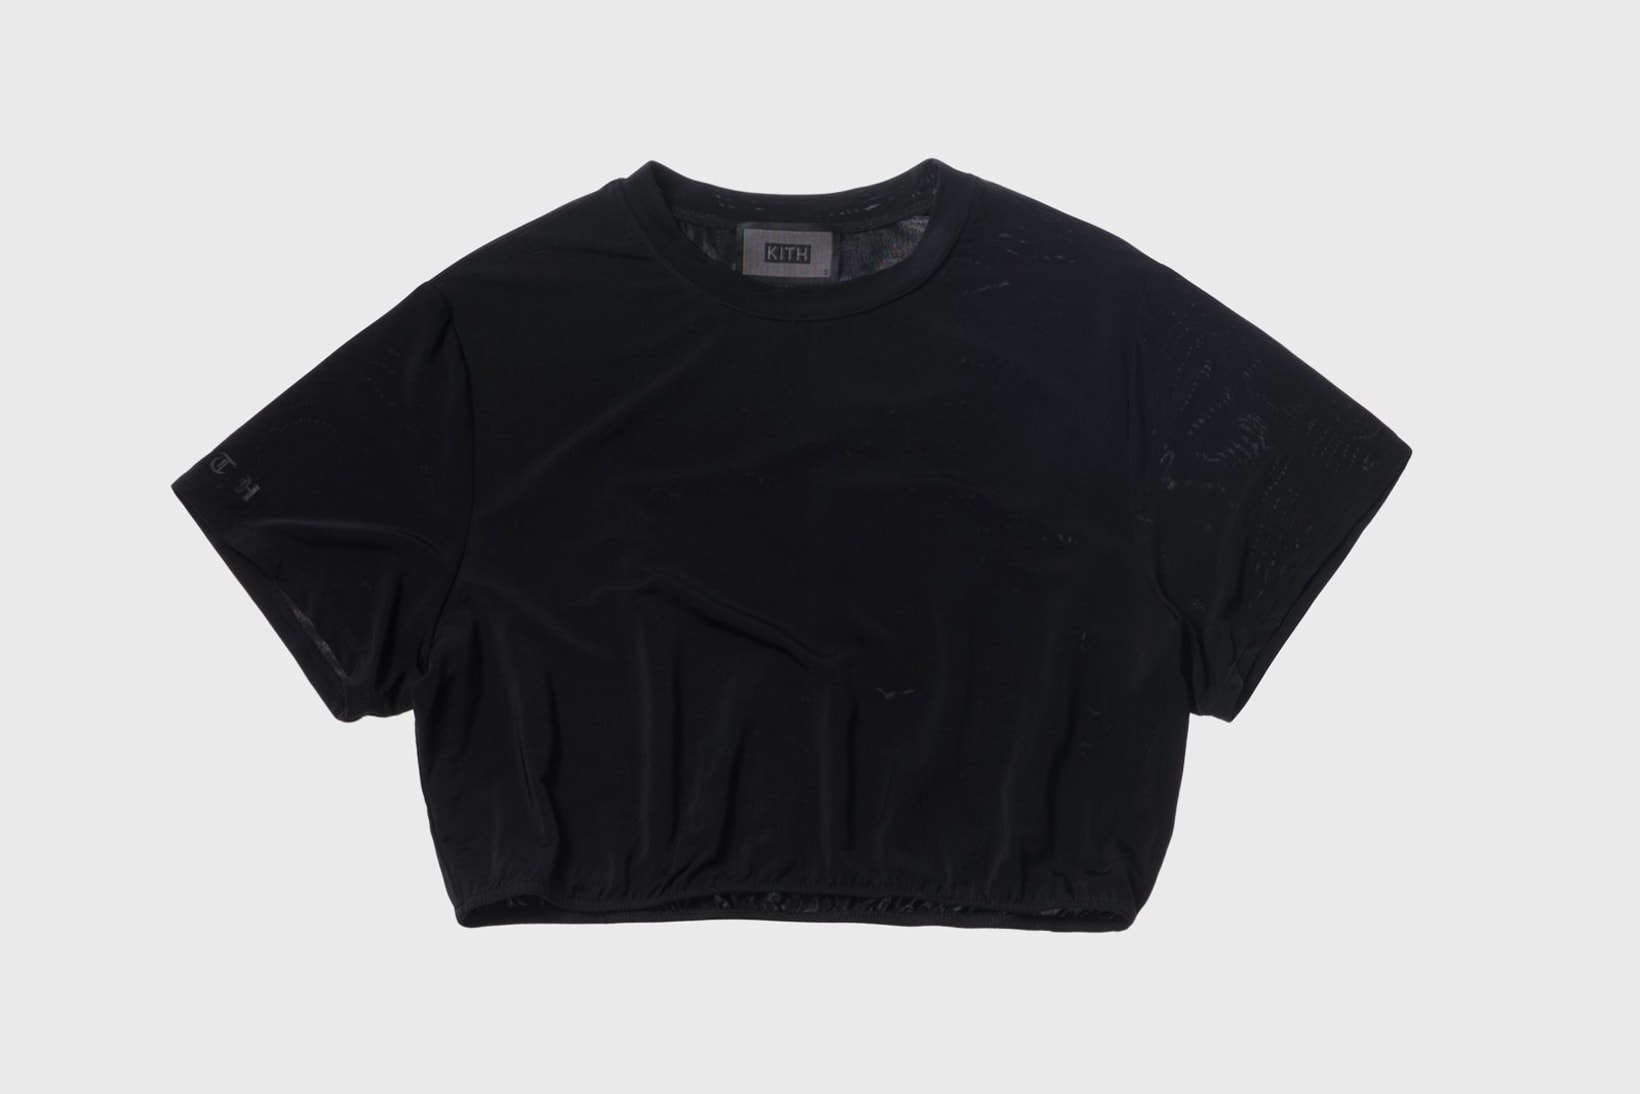 KITH Women Summer 2018 Collection Adele Cropped Tee Black